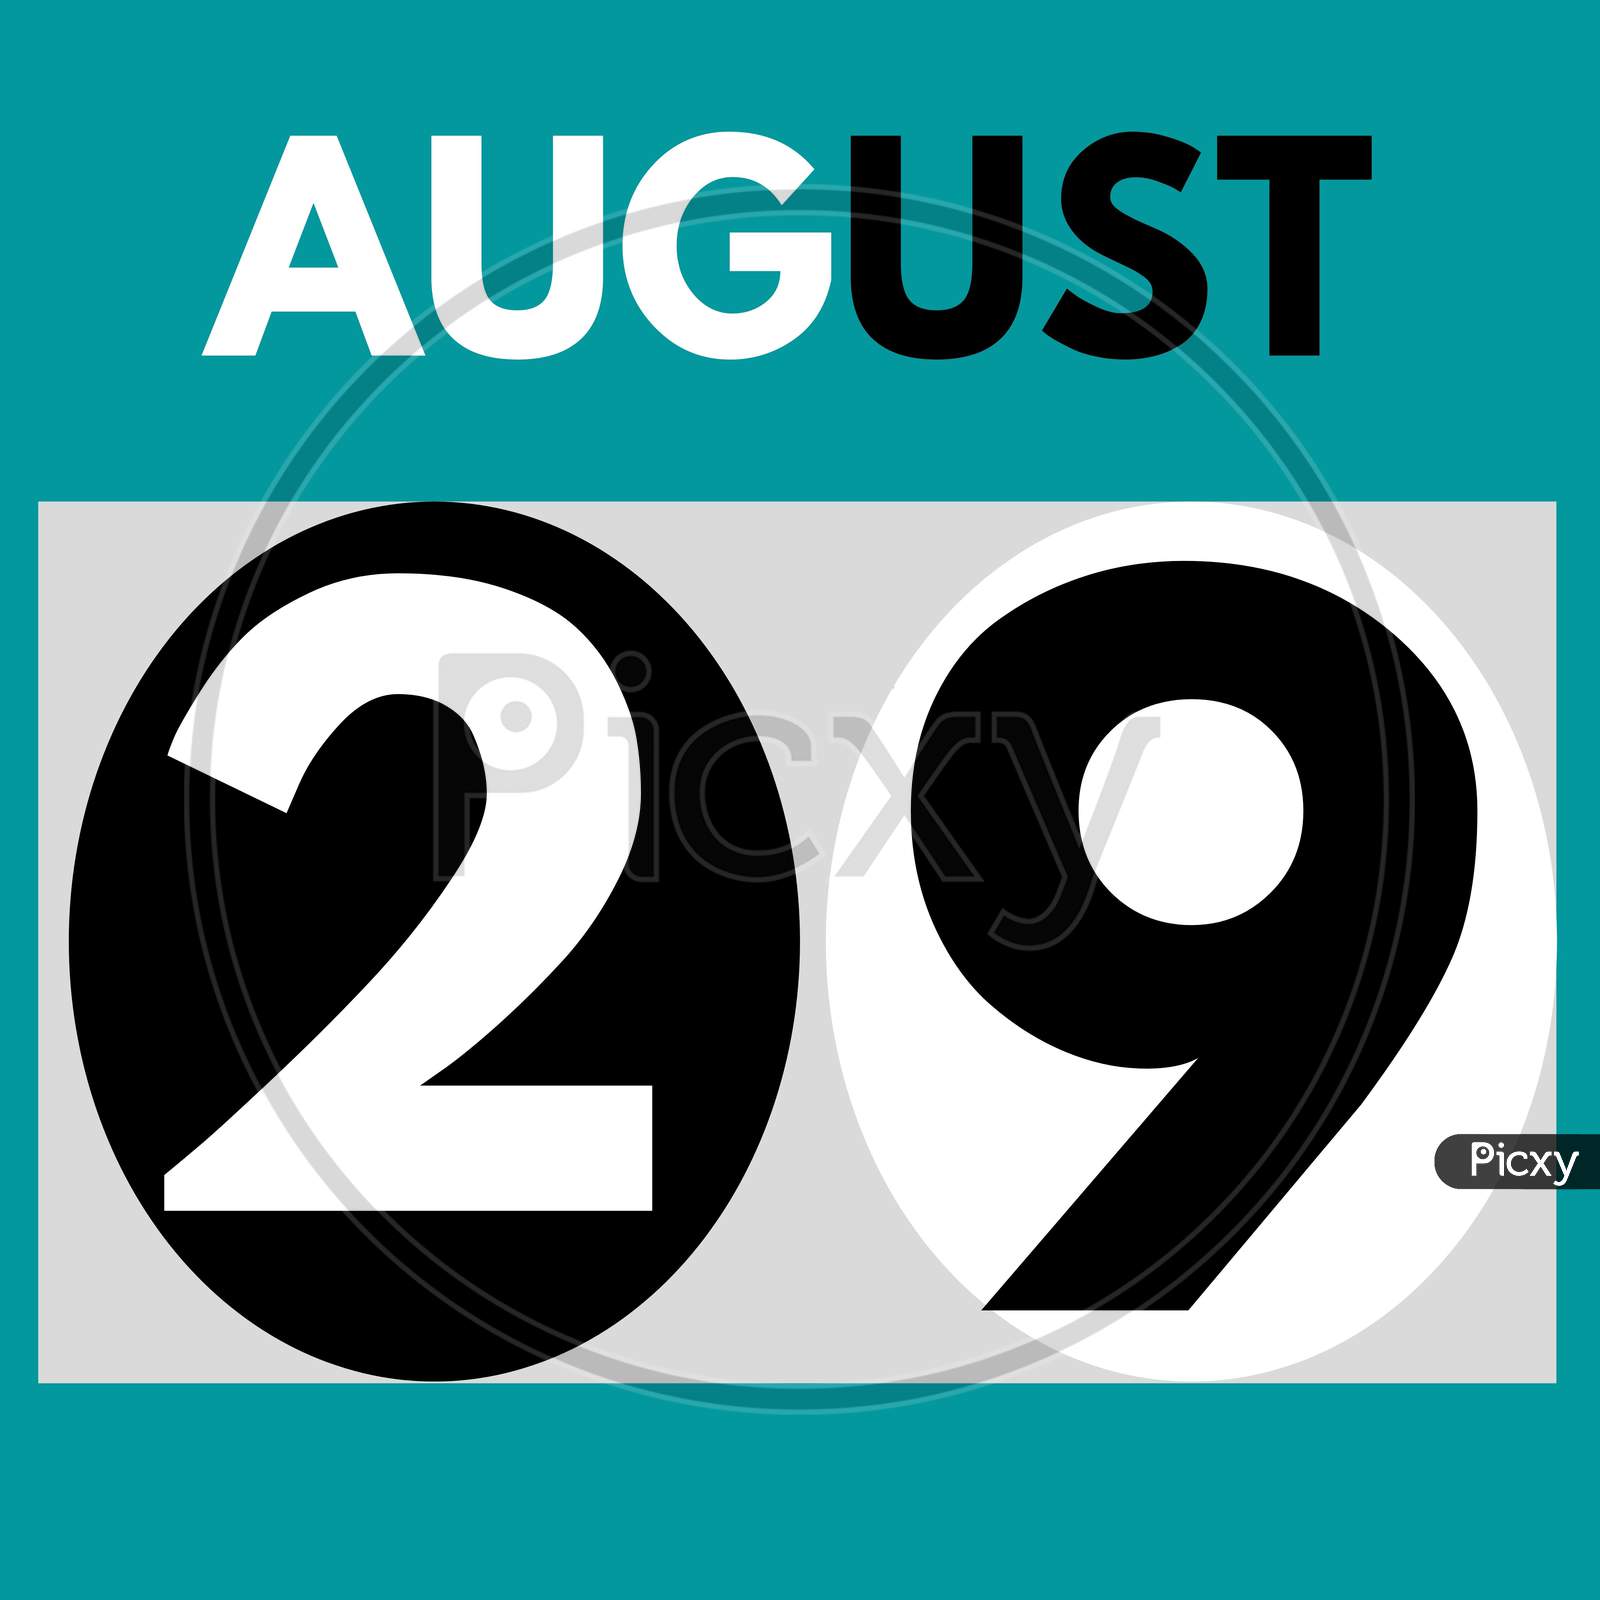 August 29 . Modern Daily Calendar Icon .Date ,Day, Month .Calendar For The Month Of August